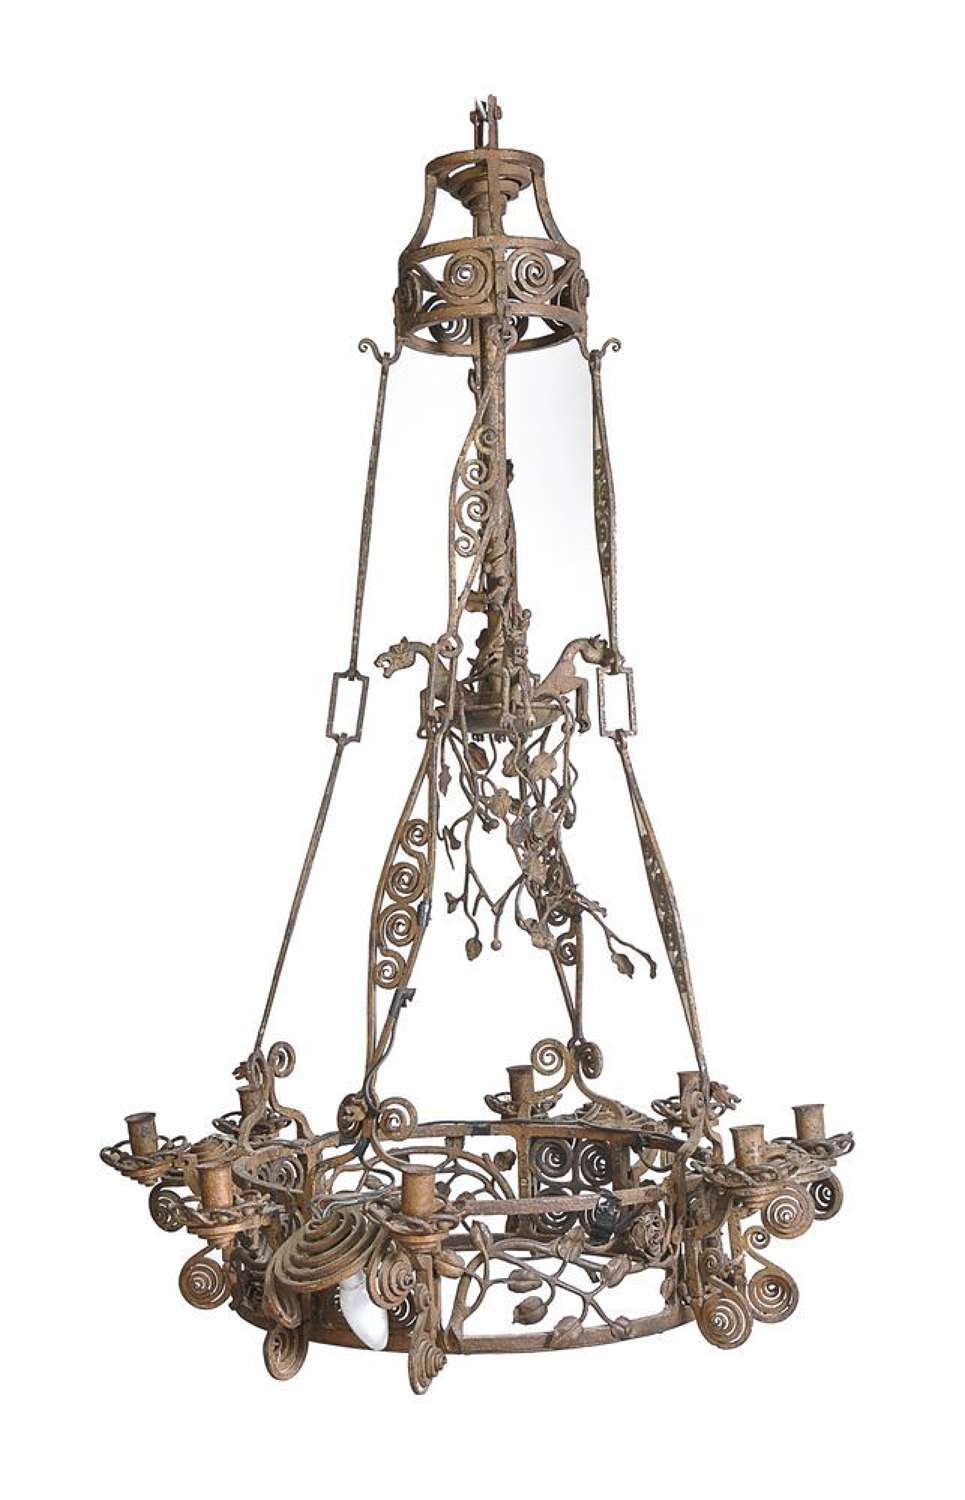 Continental Wrought Iron Chandelier c.1900